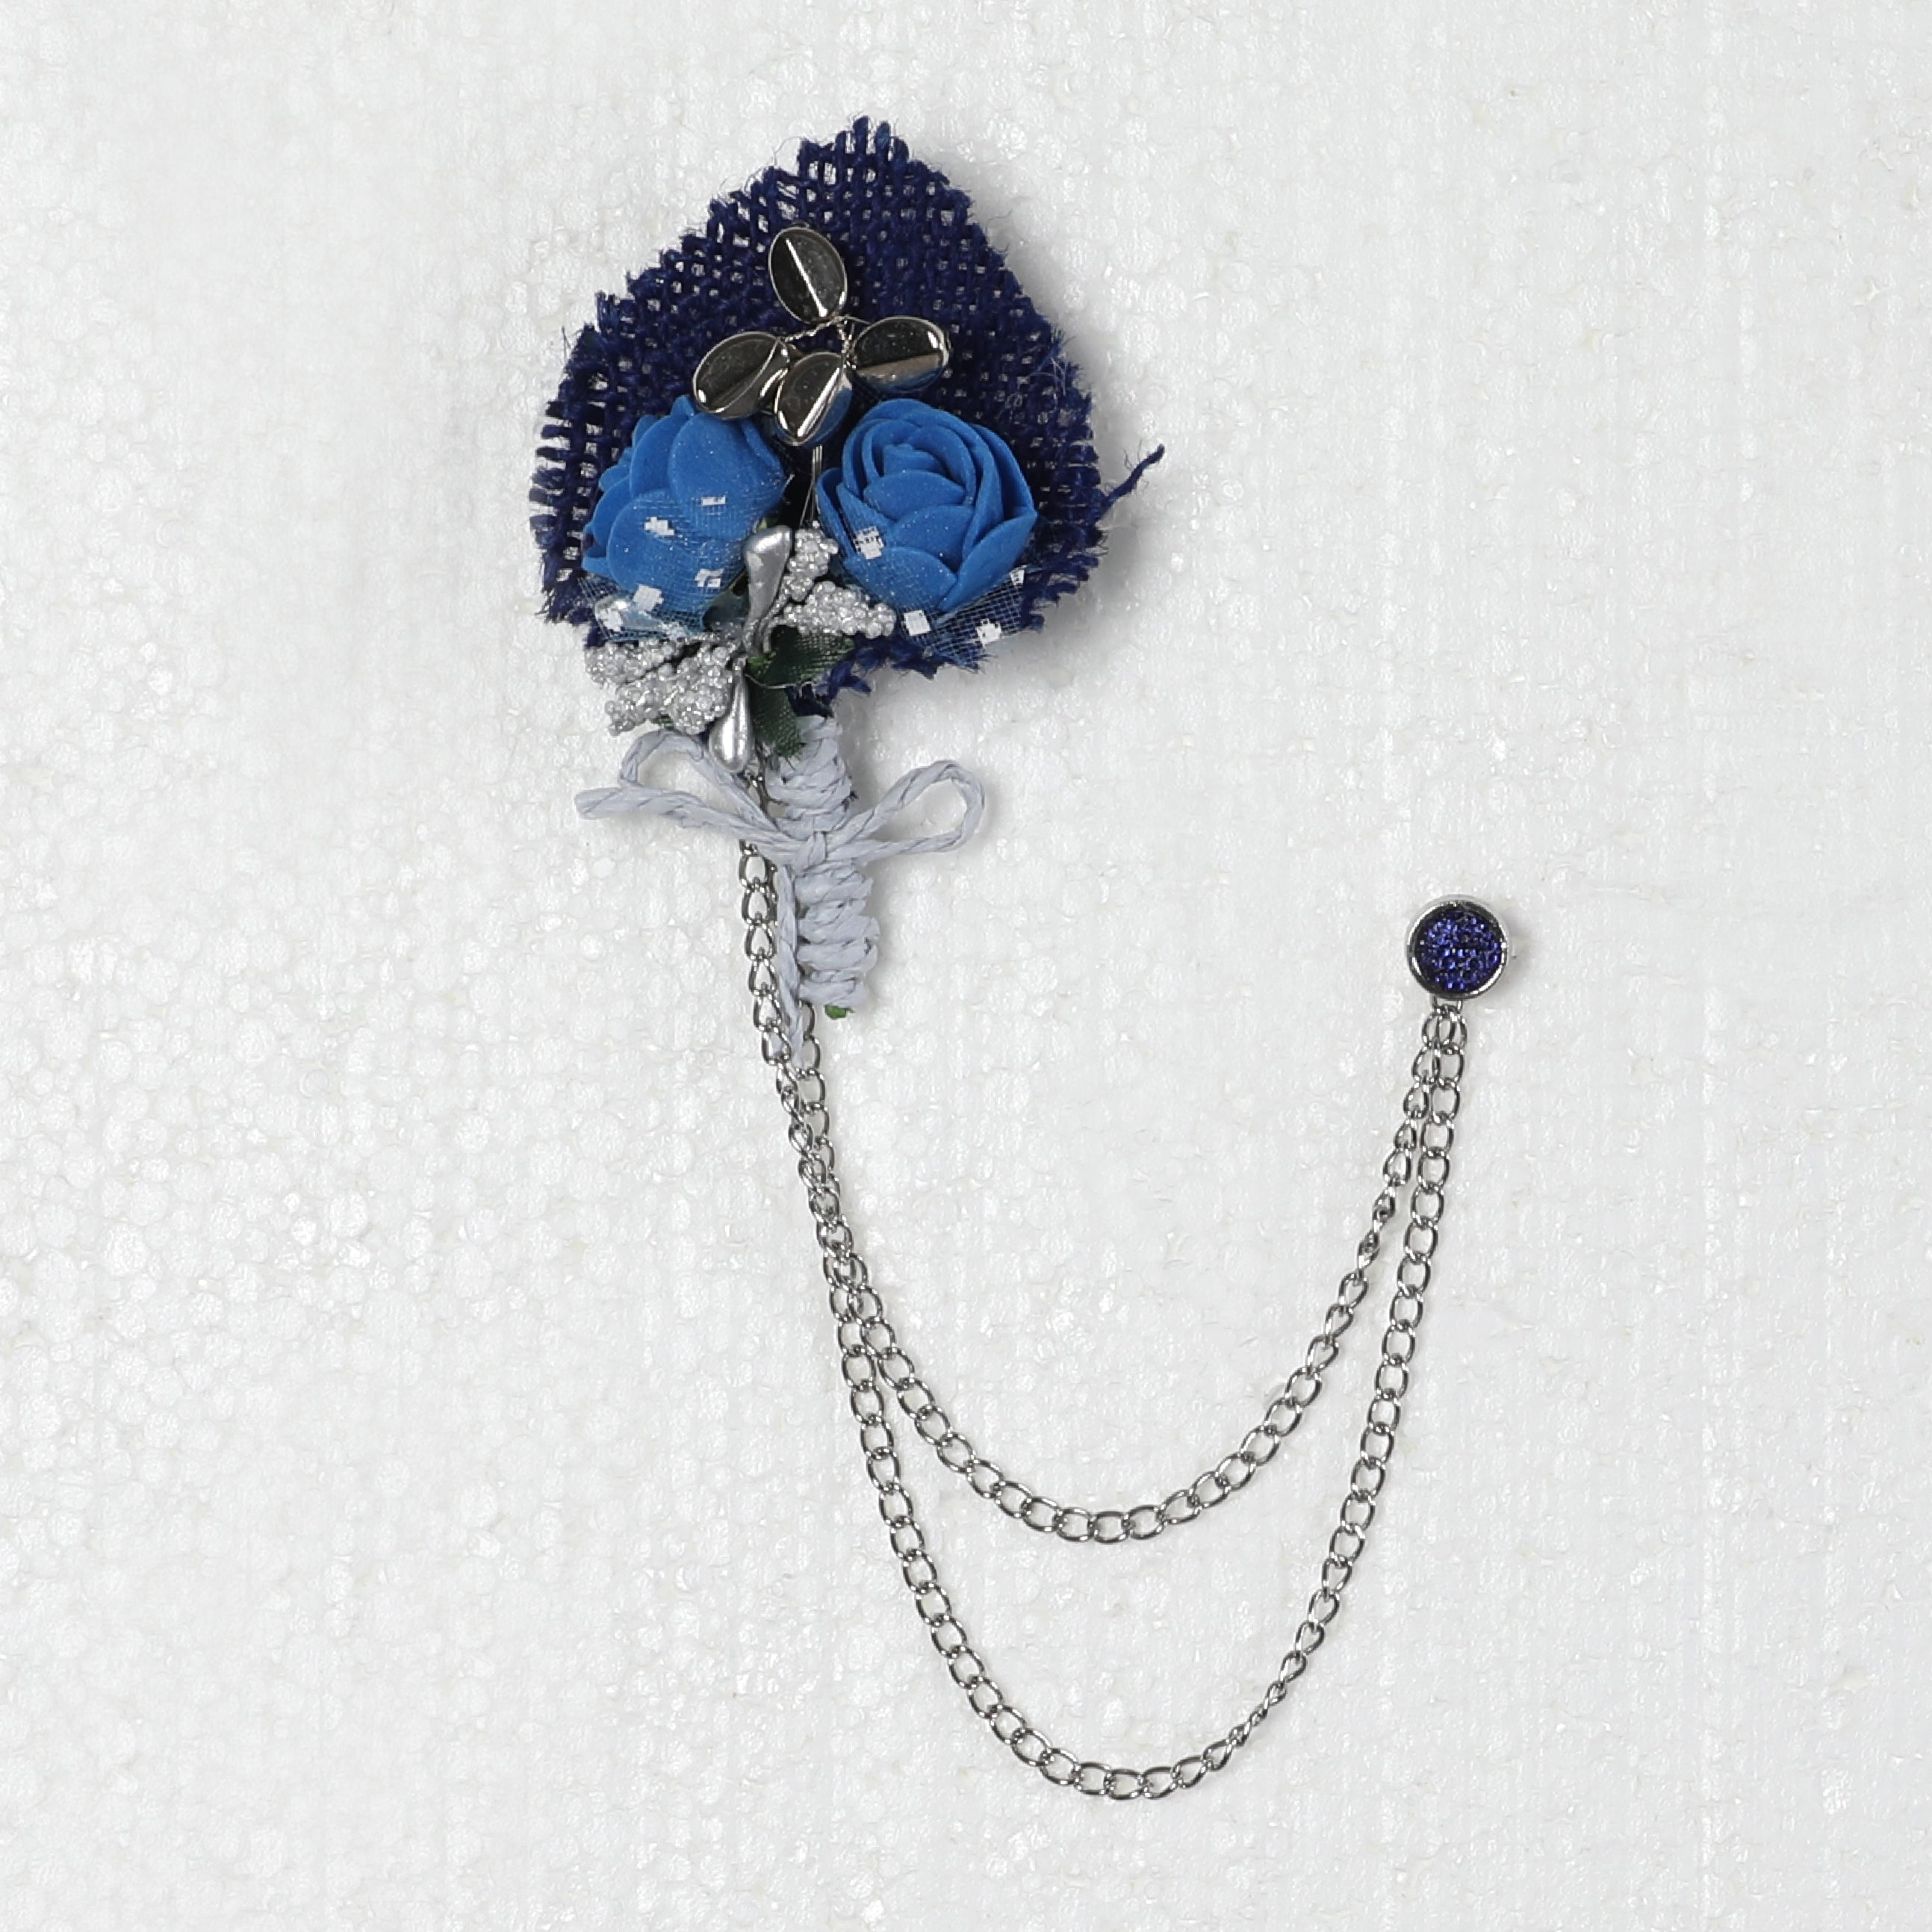 Men Silver Chained Pin With Blue Flower Design